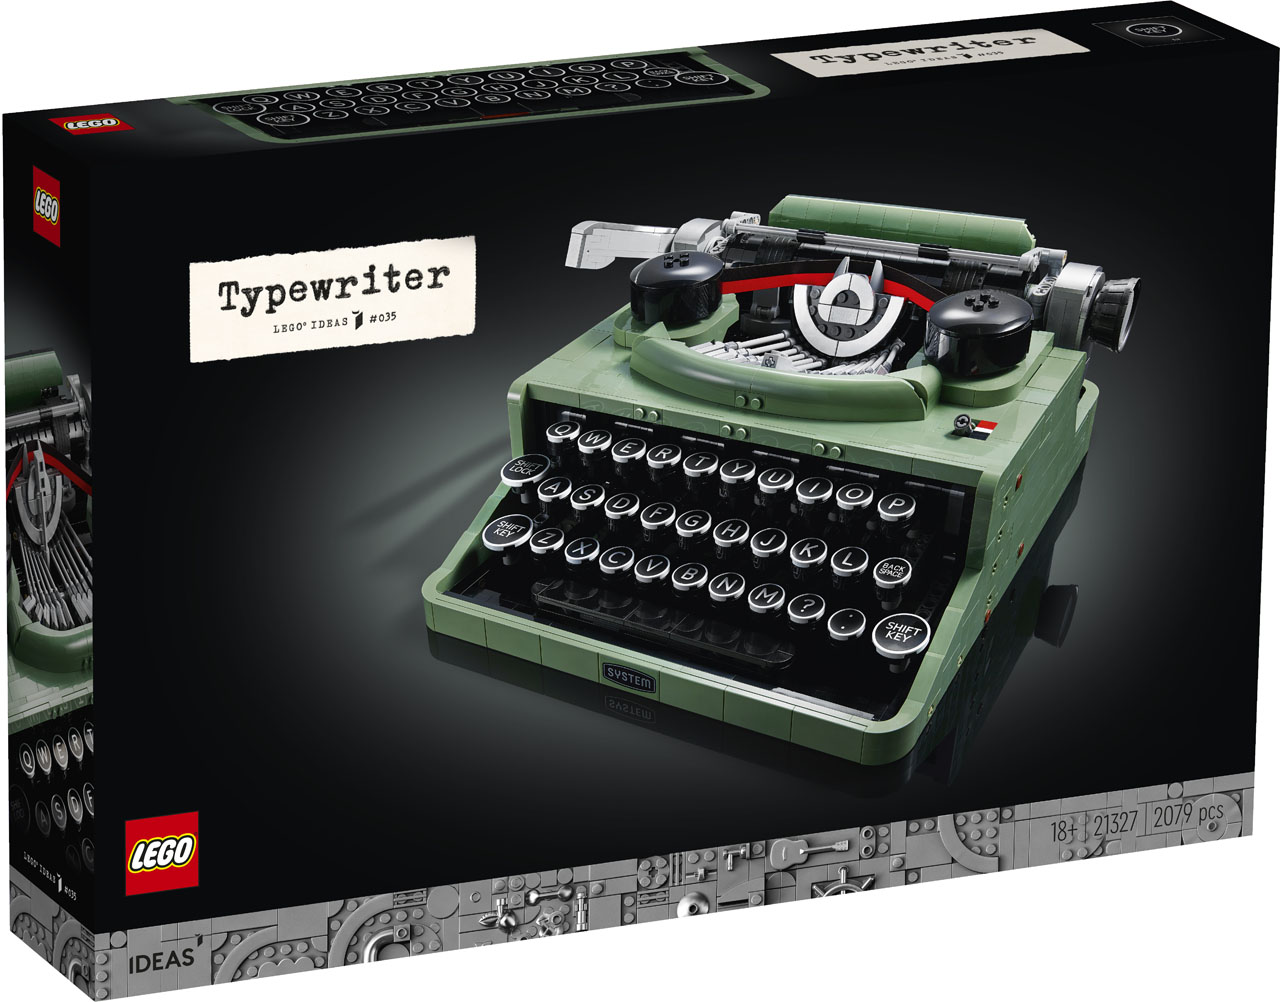 This LEGO Ideas Typewriter is just a piece of art